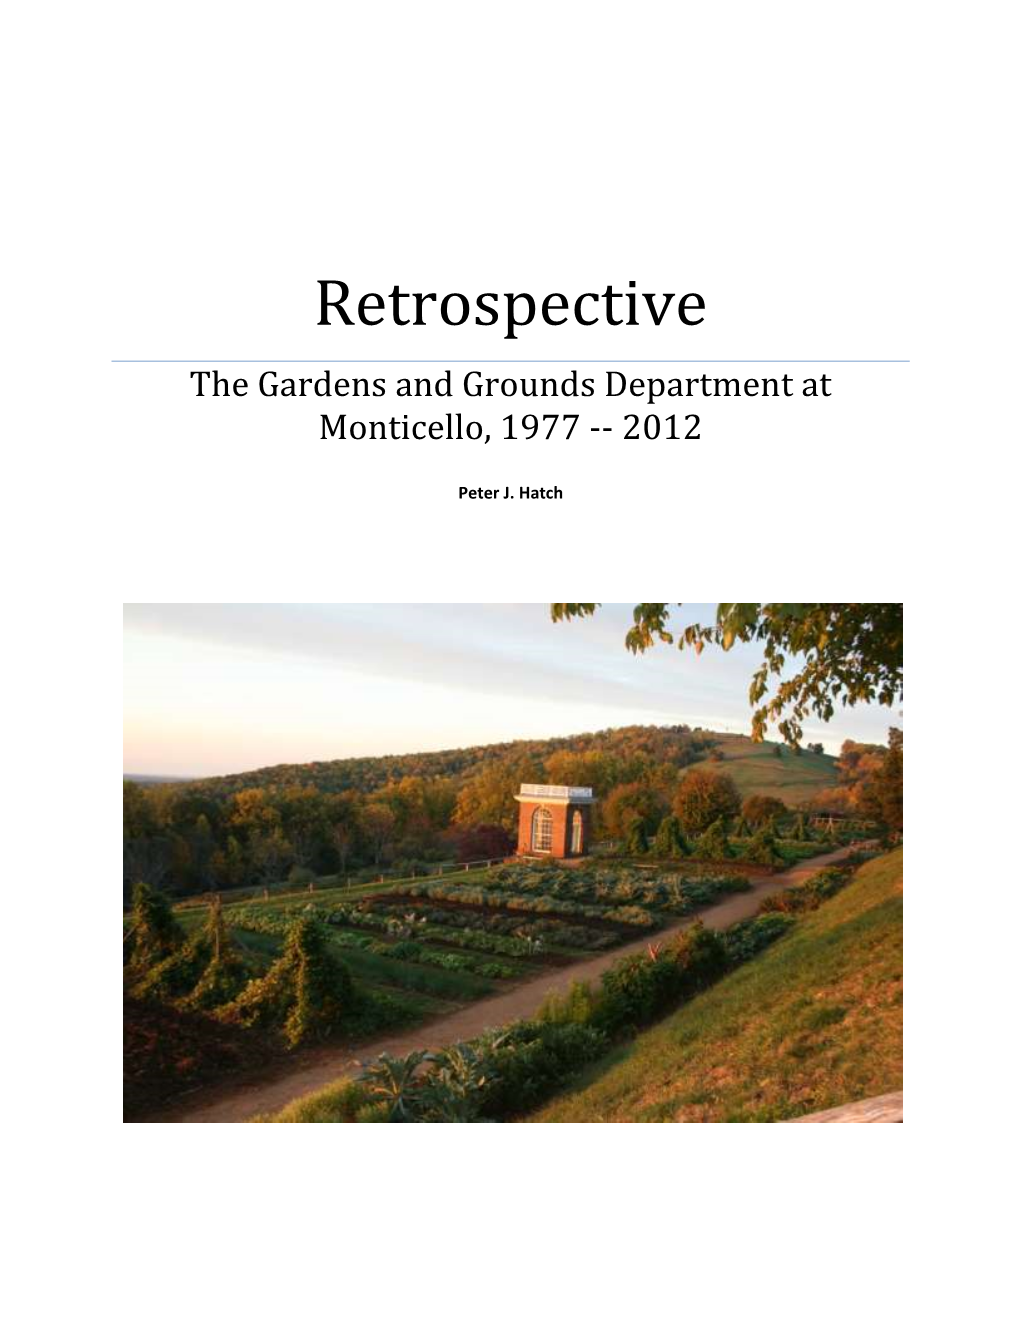 Retrospective the Gardens and Grounds Department at Monticello, 1977 -- 2012